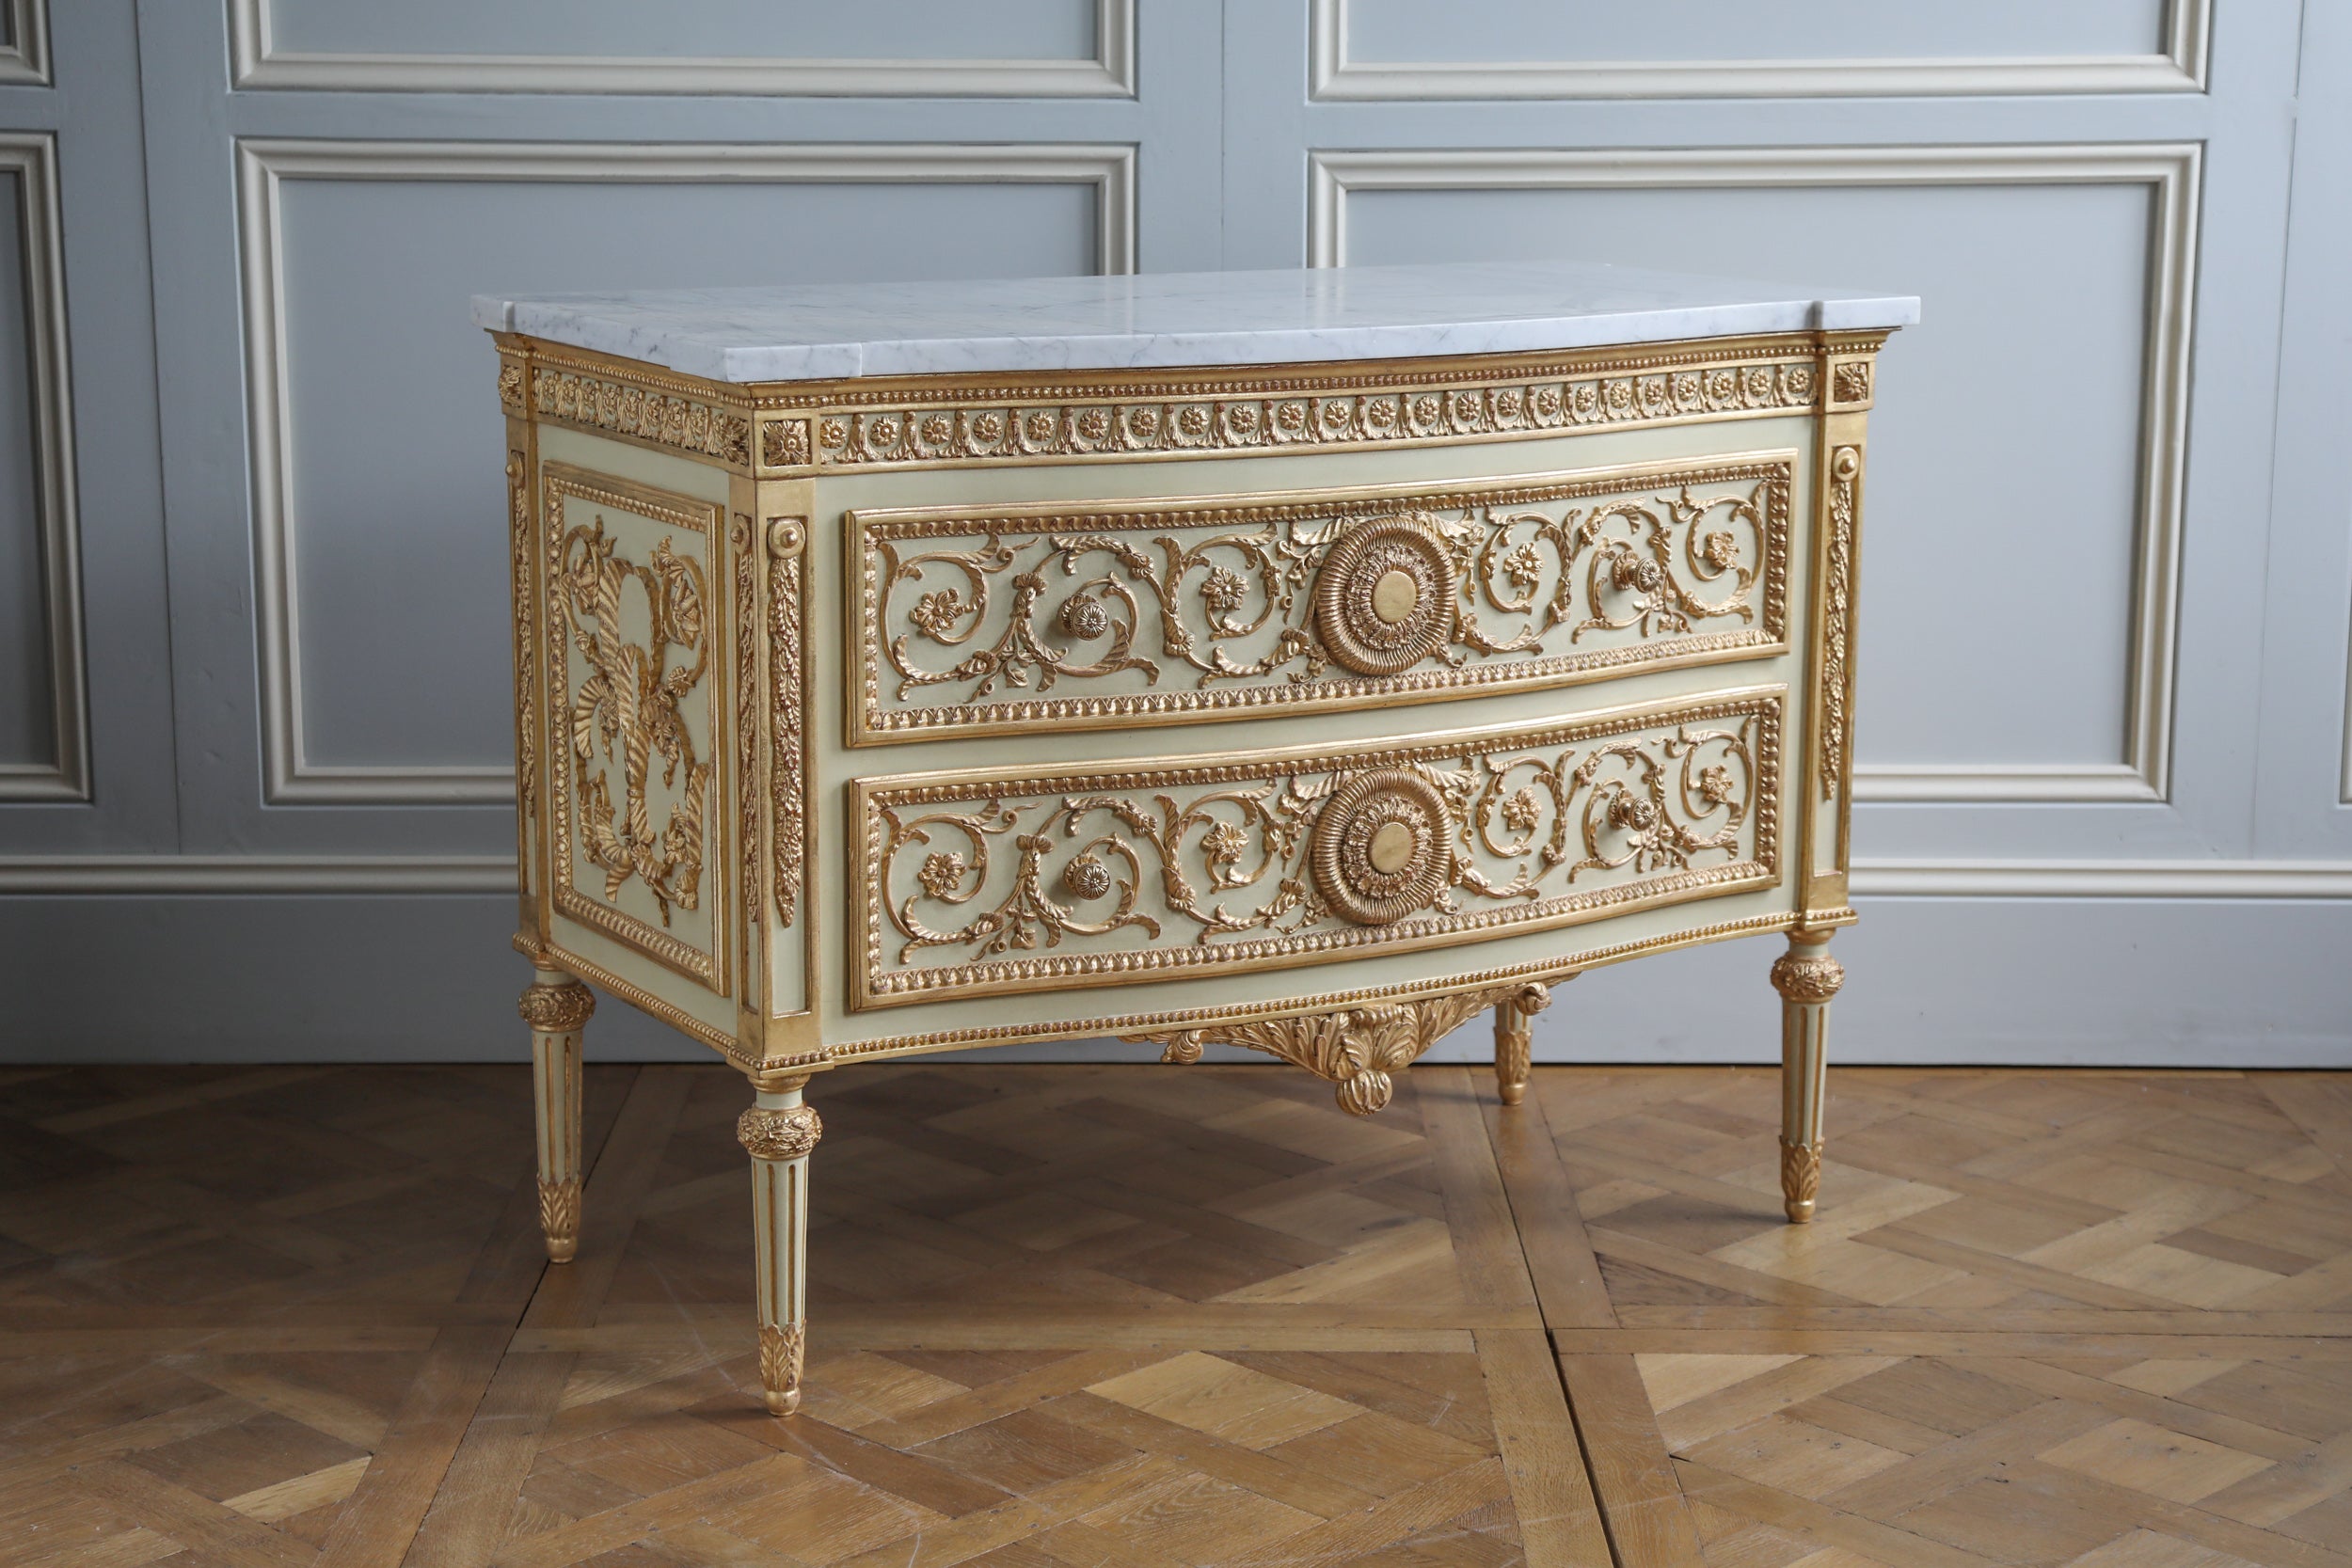 Hand carved and Hand finished Louis XVI style commode in polychrome finish.
Painted in a light French green with gold highlights.
with a 30mm Carrara Marble top
Fine details all around inspired by ancient Greece motifs.